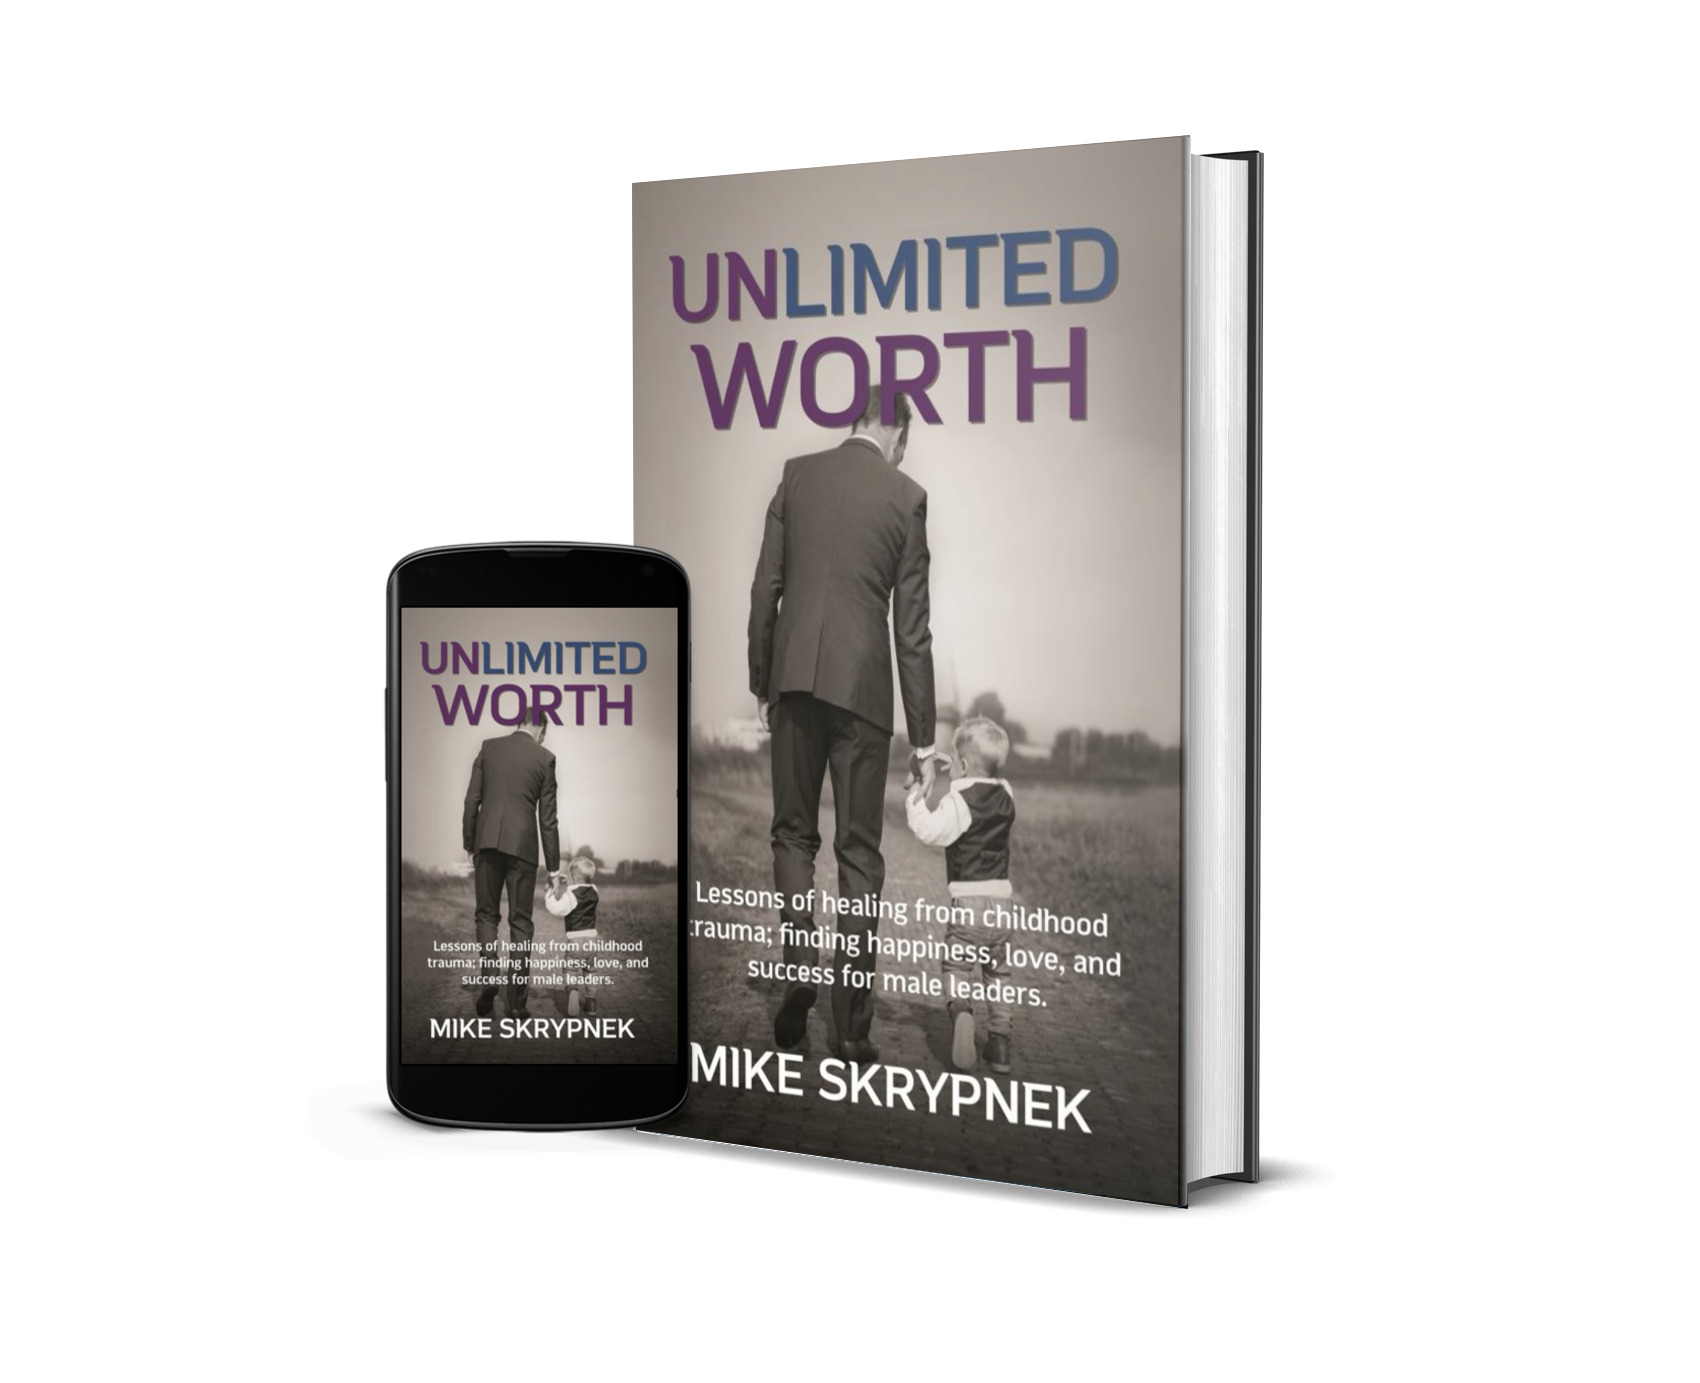 Unlimited Worth-Lessons of Healing from Childhood Trauma; Finding Happiness, Love and Success for Male Leaders.